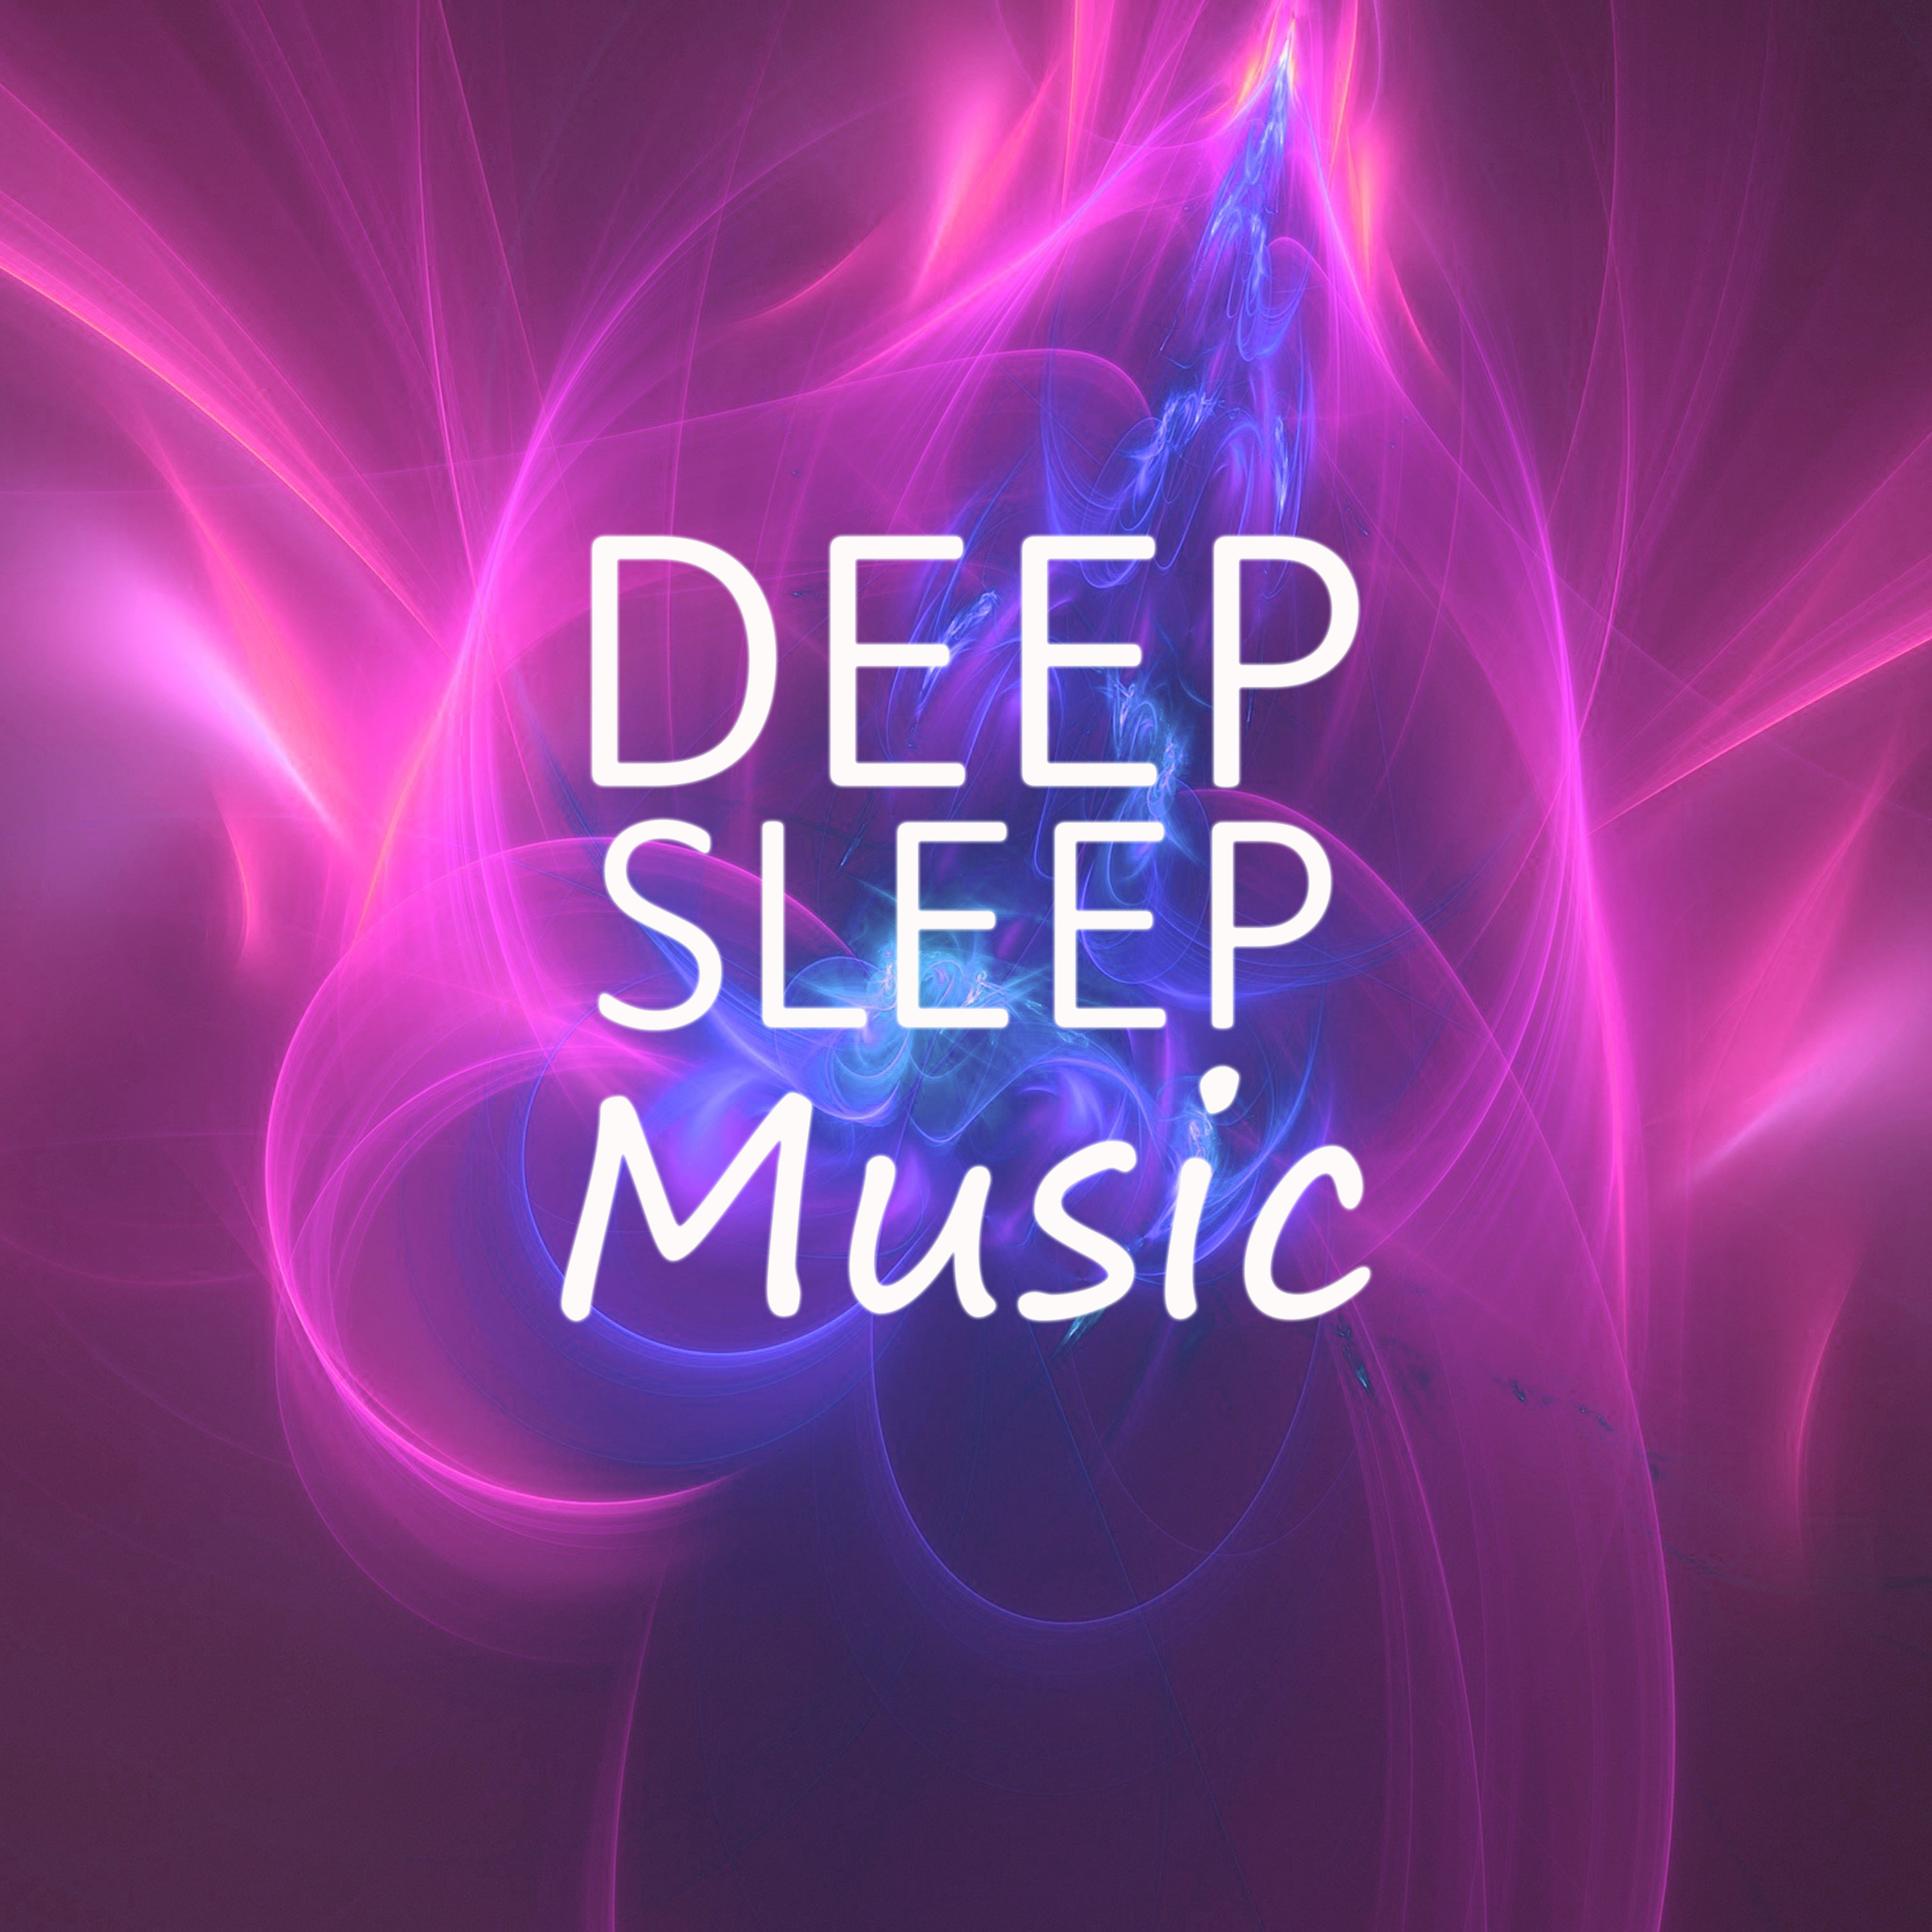 Deep Sleep Music – Soft Music to Dream, Background for Bedtime Stories, Inspiring Nature Sounds for Yoga and Sleep Meditation, Relax and Have a Deep Sleep